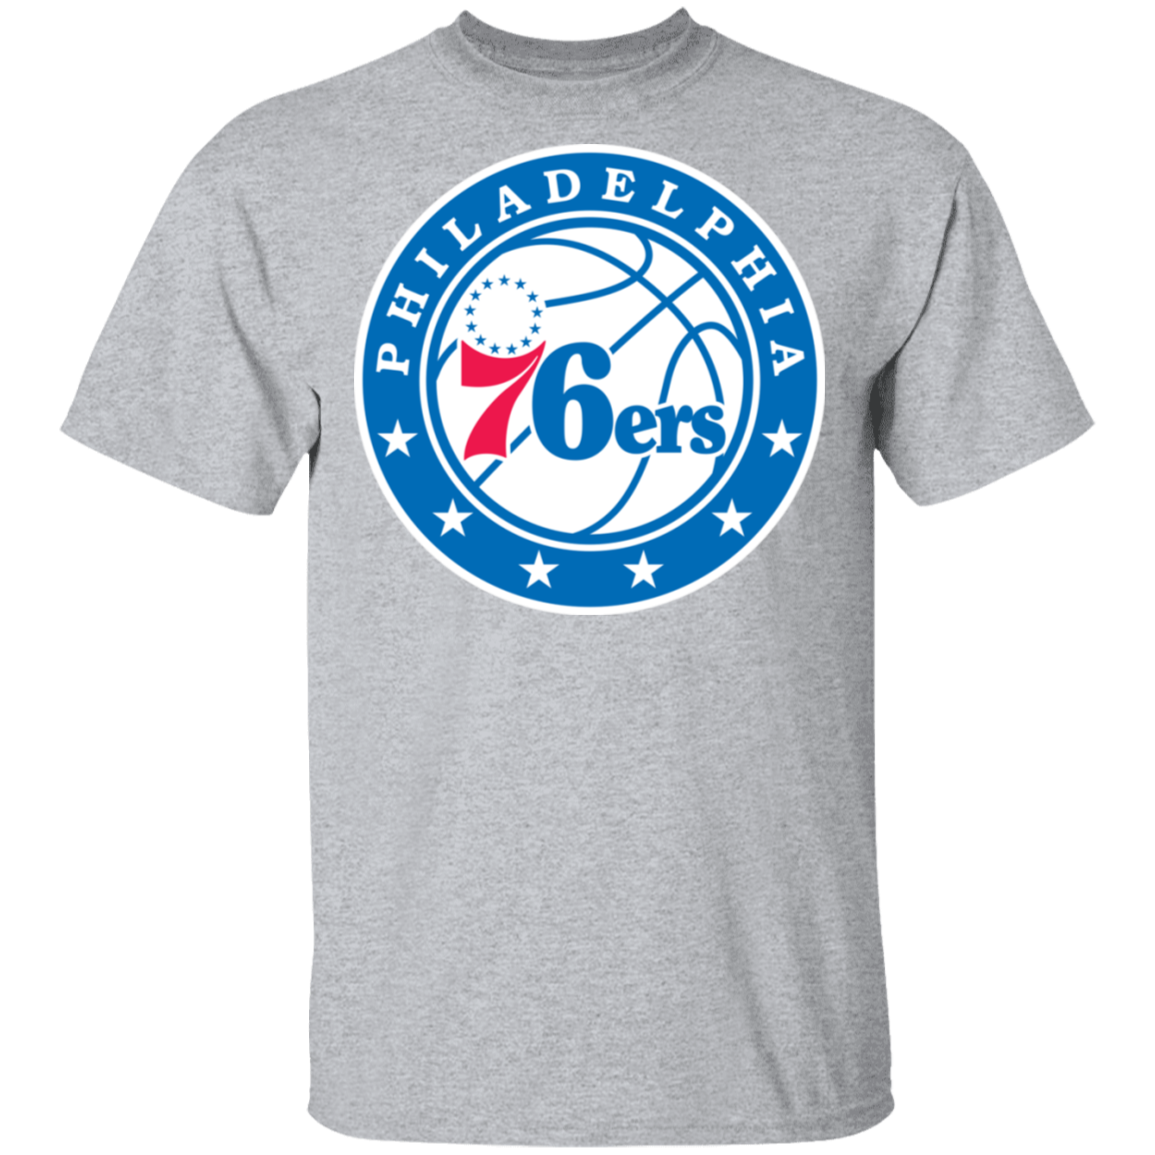 sixers t shirts